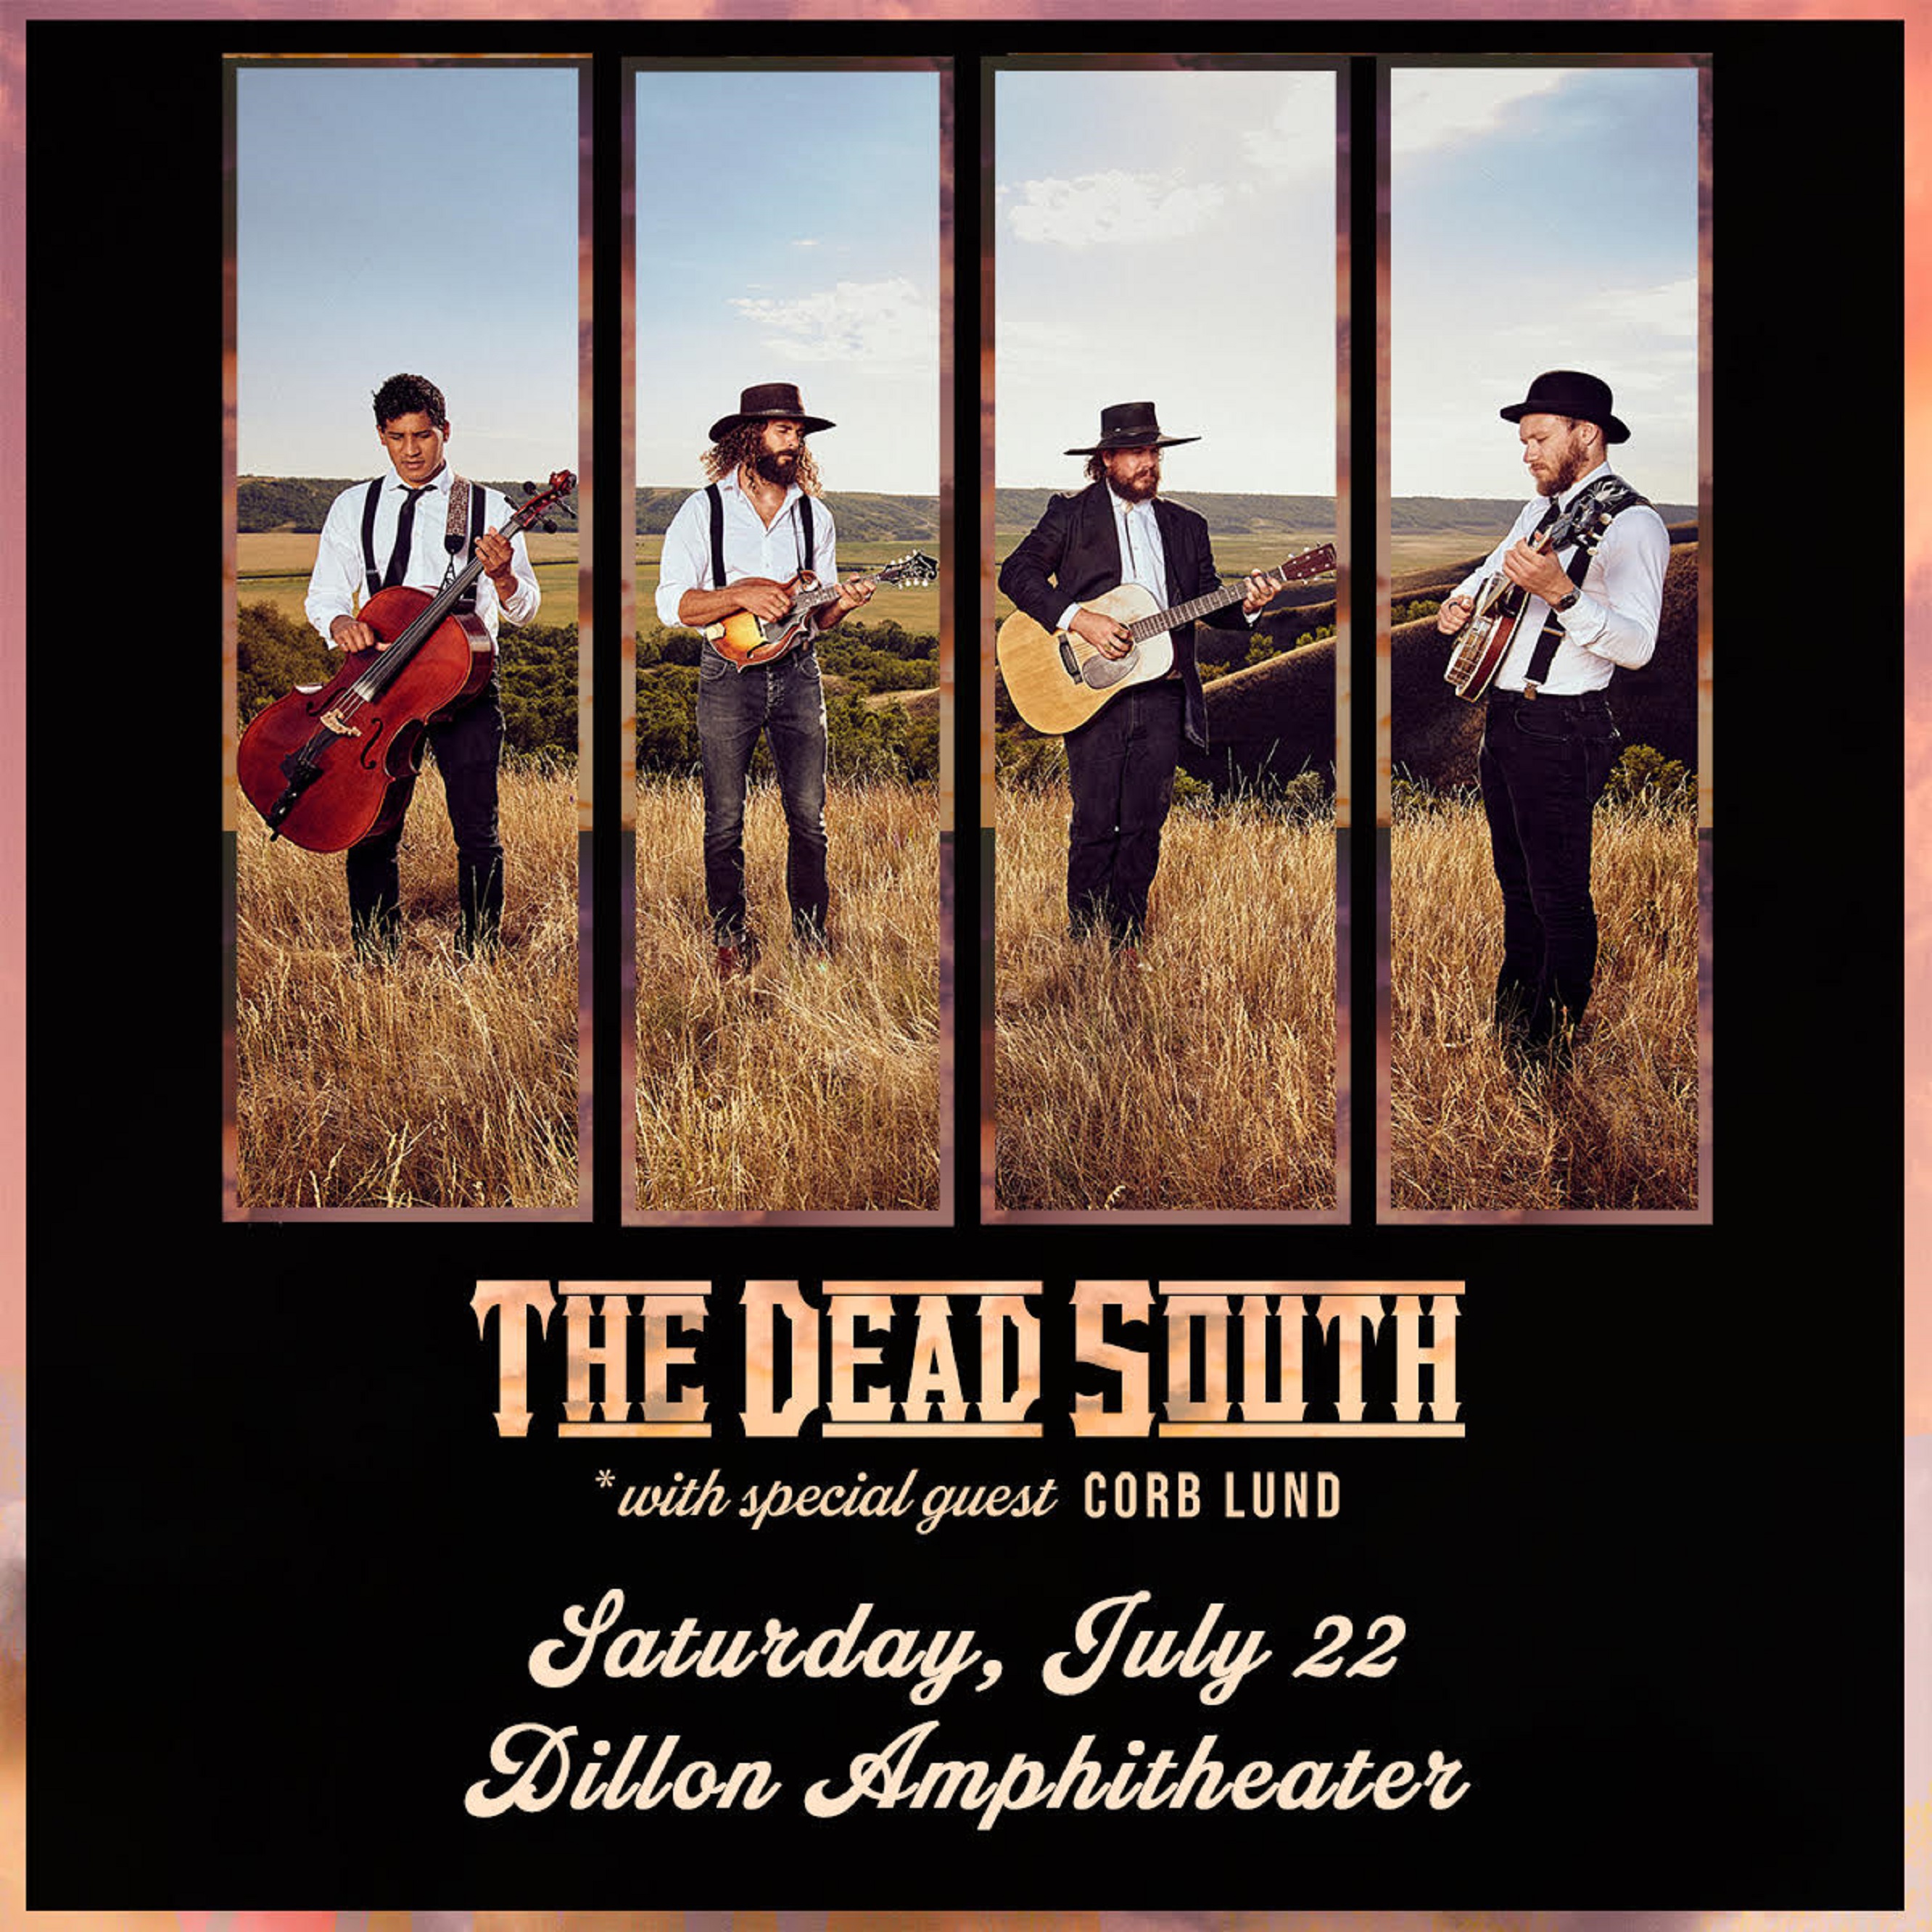 THE DEAD SOUTH with CORB LUND live at Dillon Amphitheater on Saturday, July 22, 2023